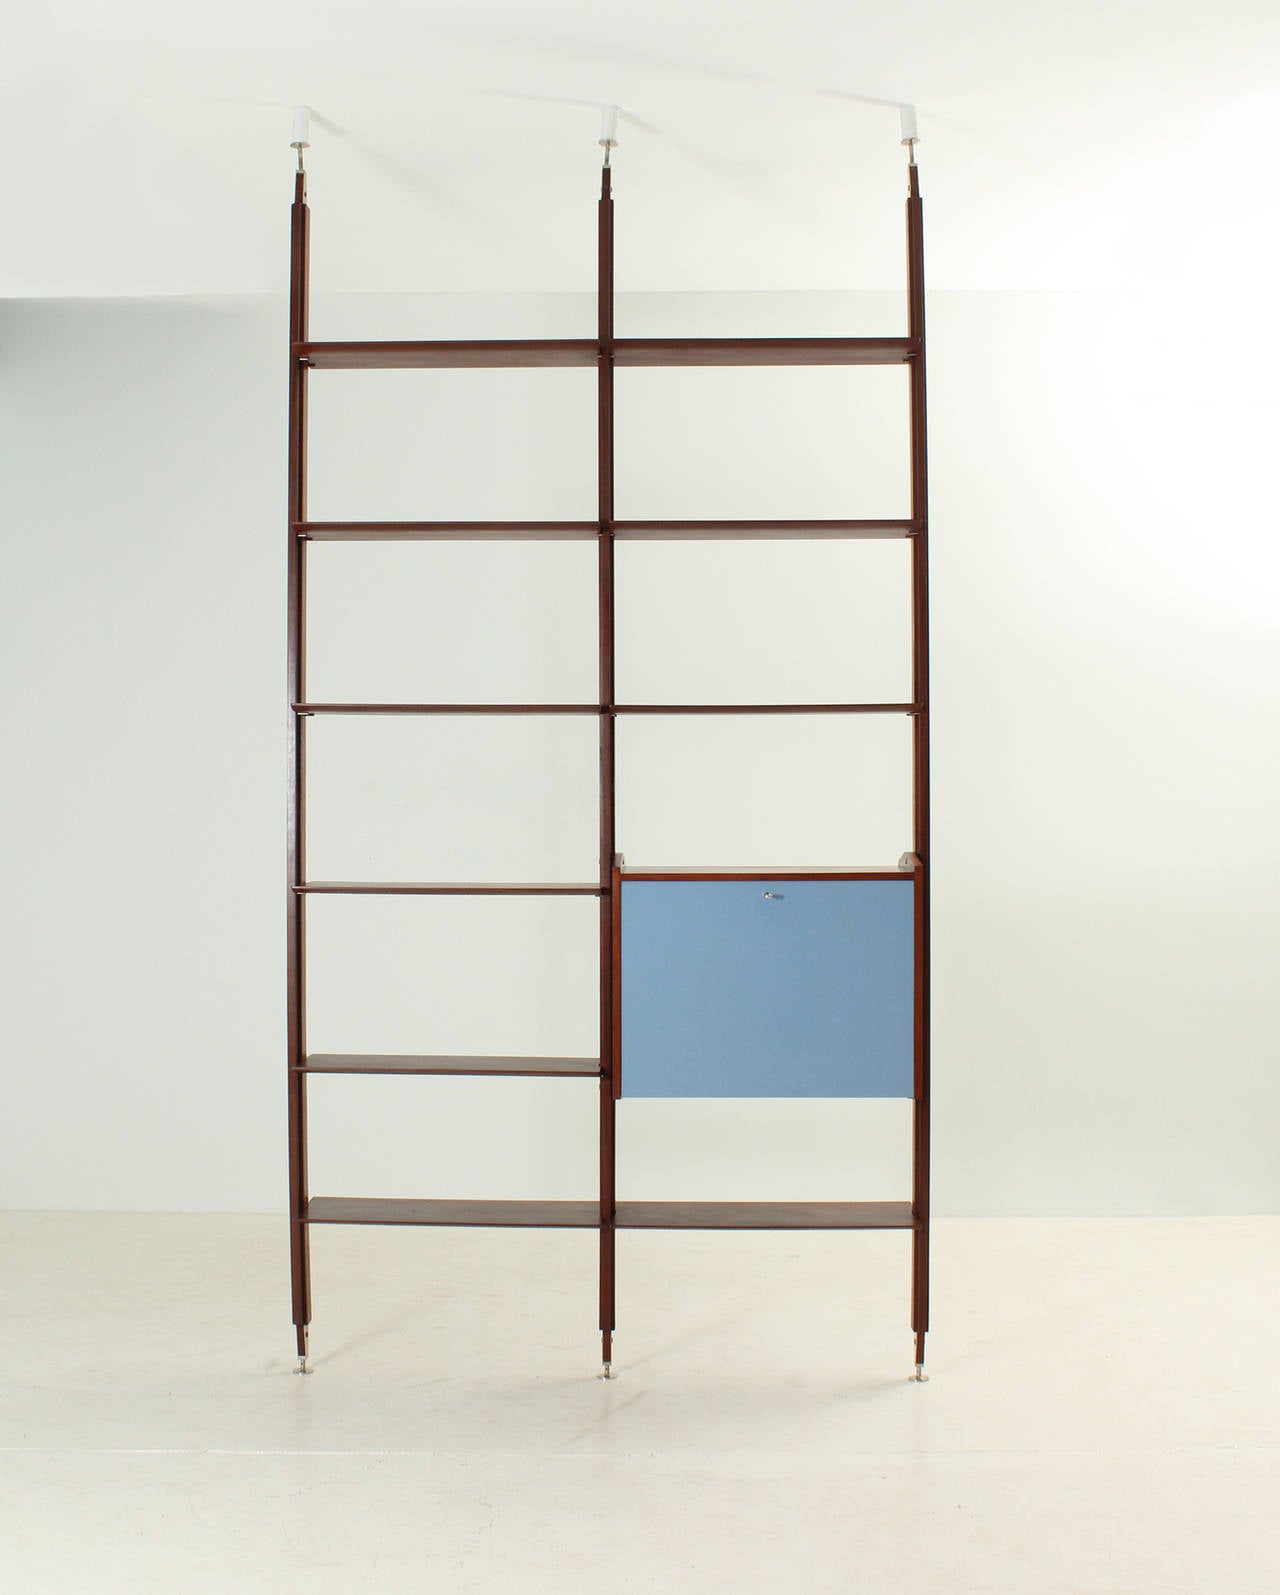 Italian bookshelf with dry bar from 1950s. Teakwood, laminated front door, glass and nickel metal fittings. Appropriate size to be used as a room separation or against the wall.